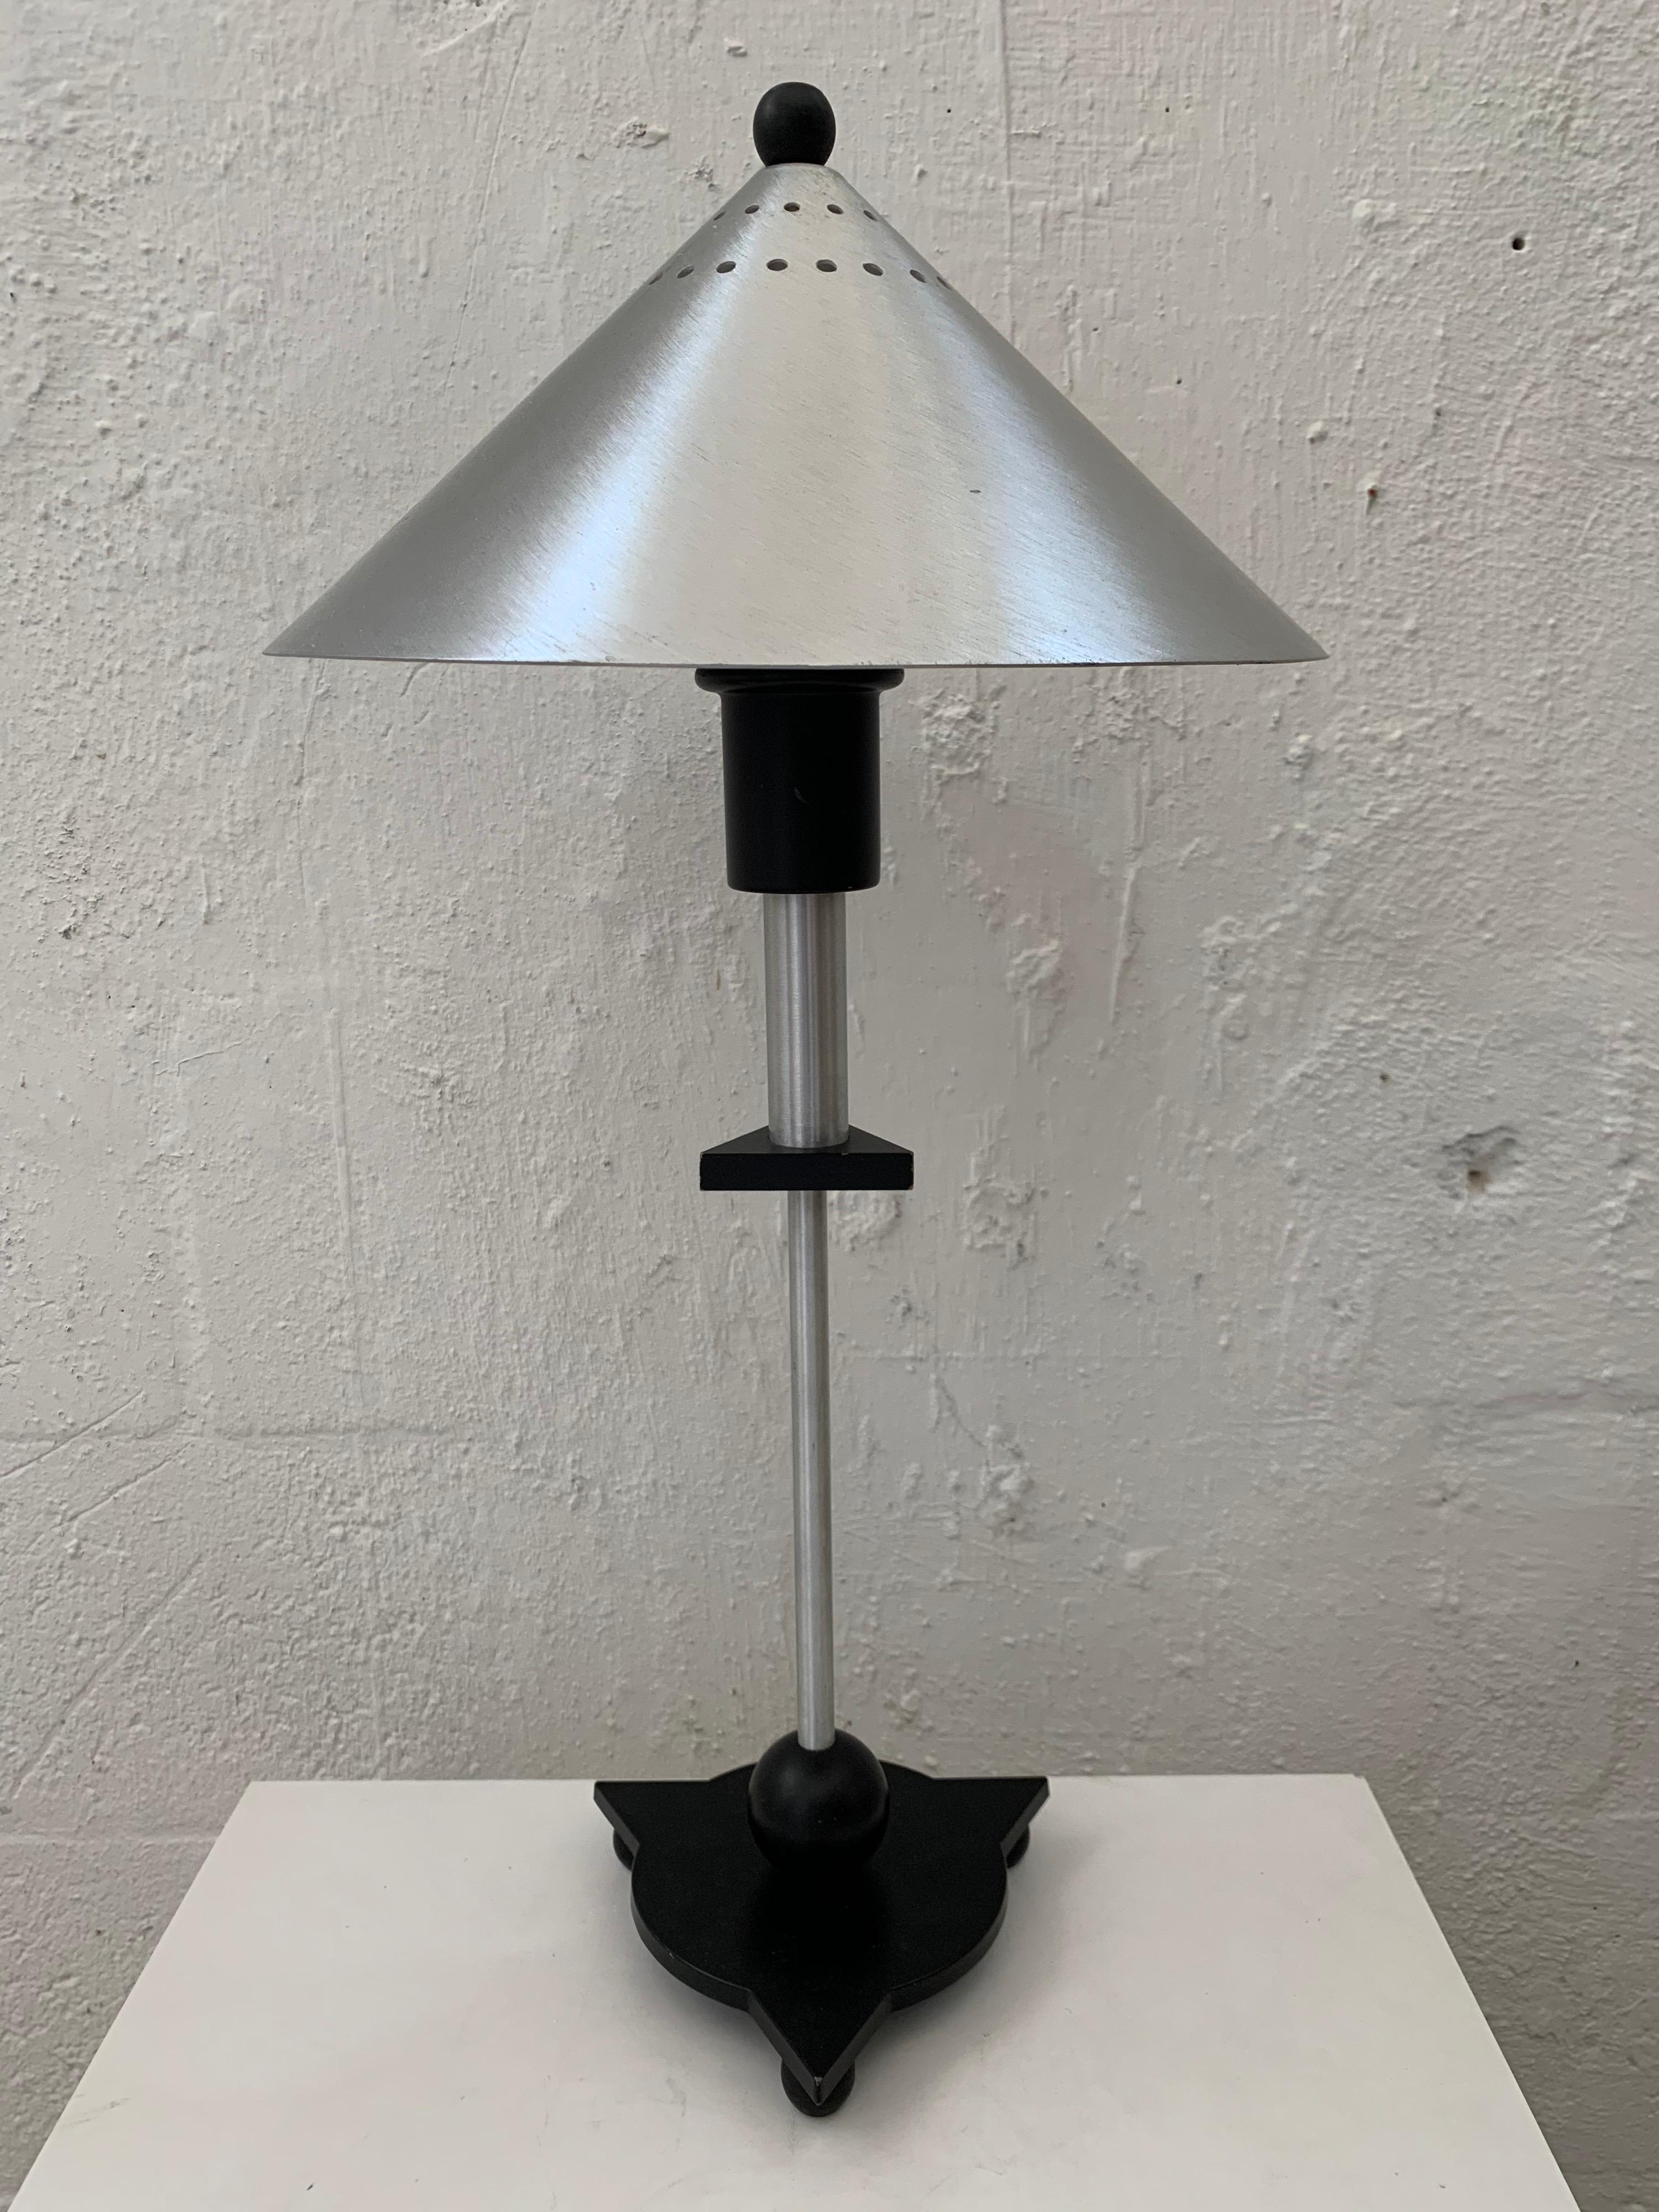 Set of two Postmodern, Memphis style table lamps rendered in stainless steel and geometric black painted wood components, by BE-YANG, 1980s.